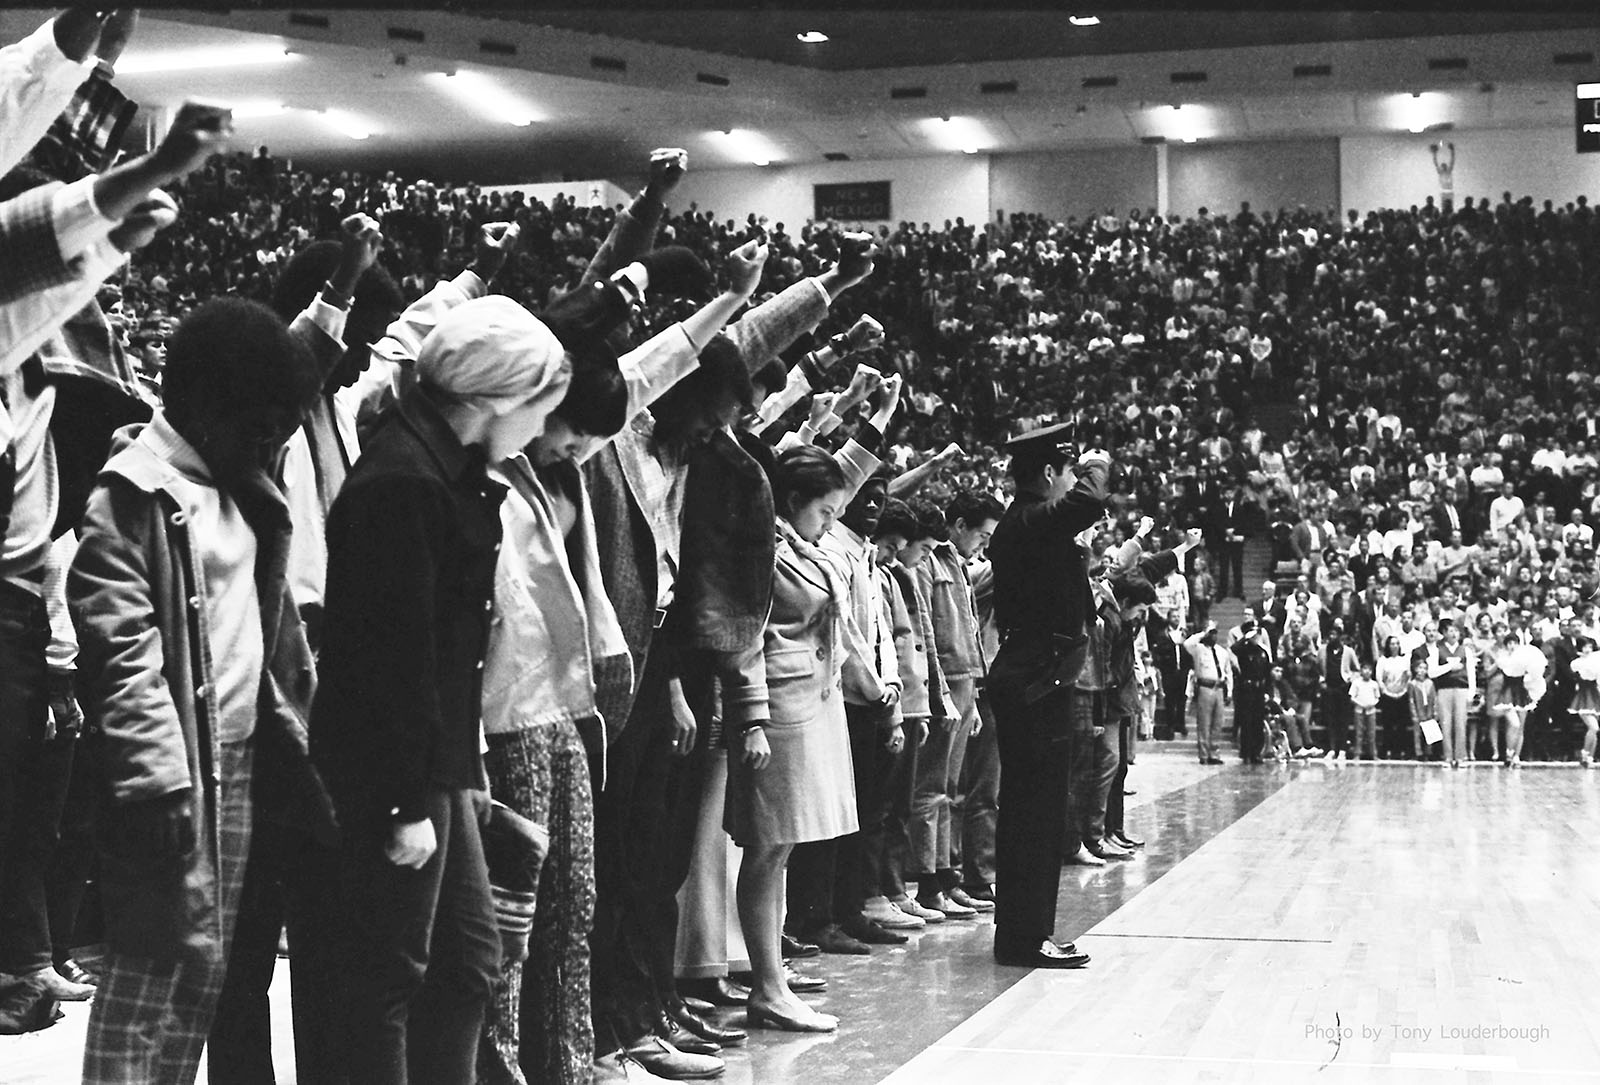 Anthony Louderbough, University of New Mexico Students Give Black Power Salute during the US National Anthem